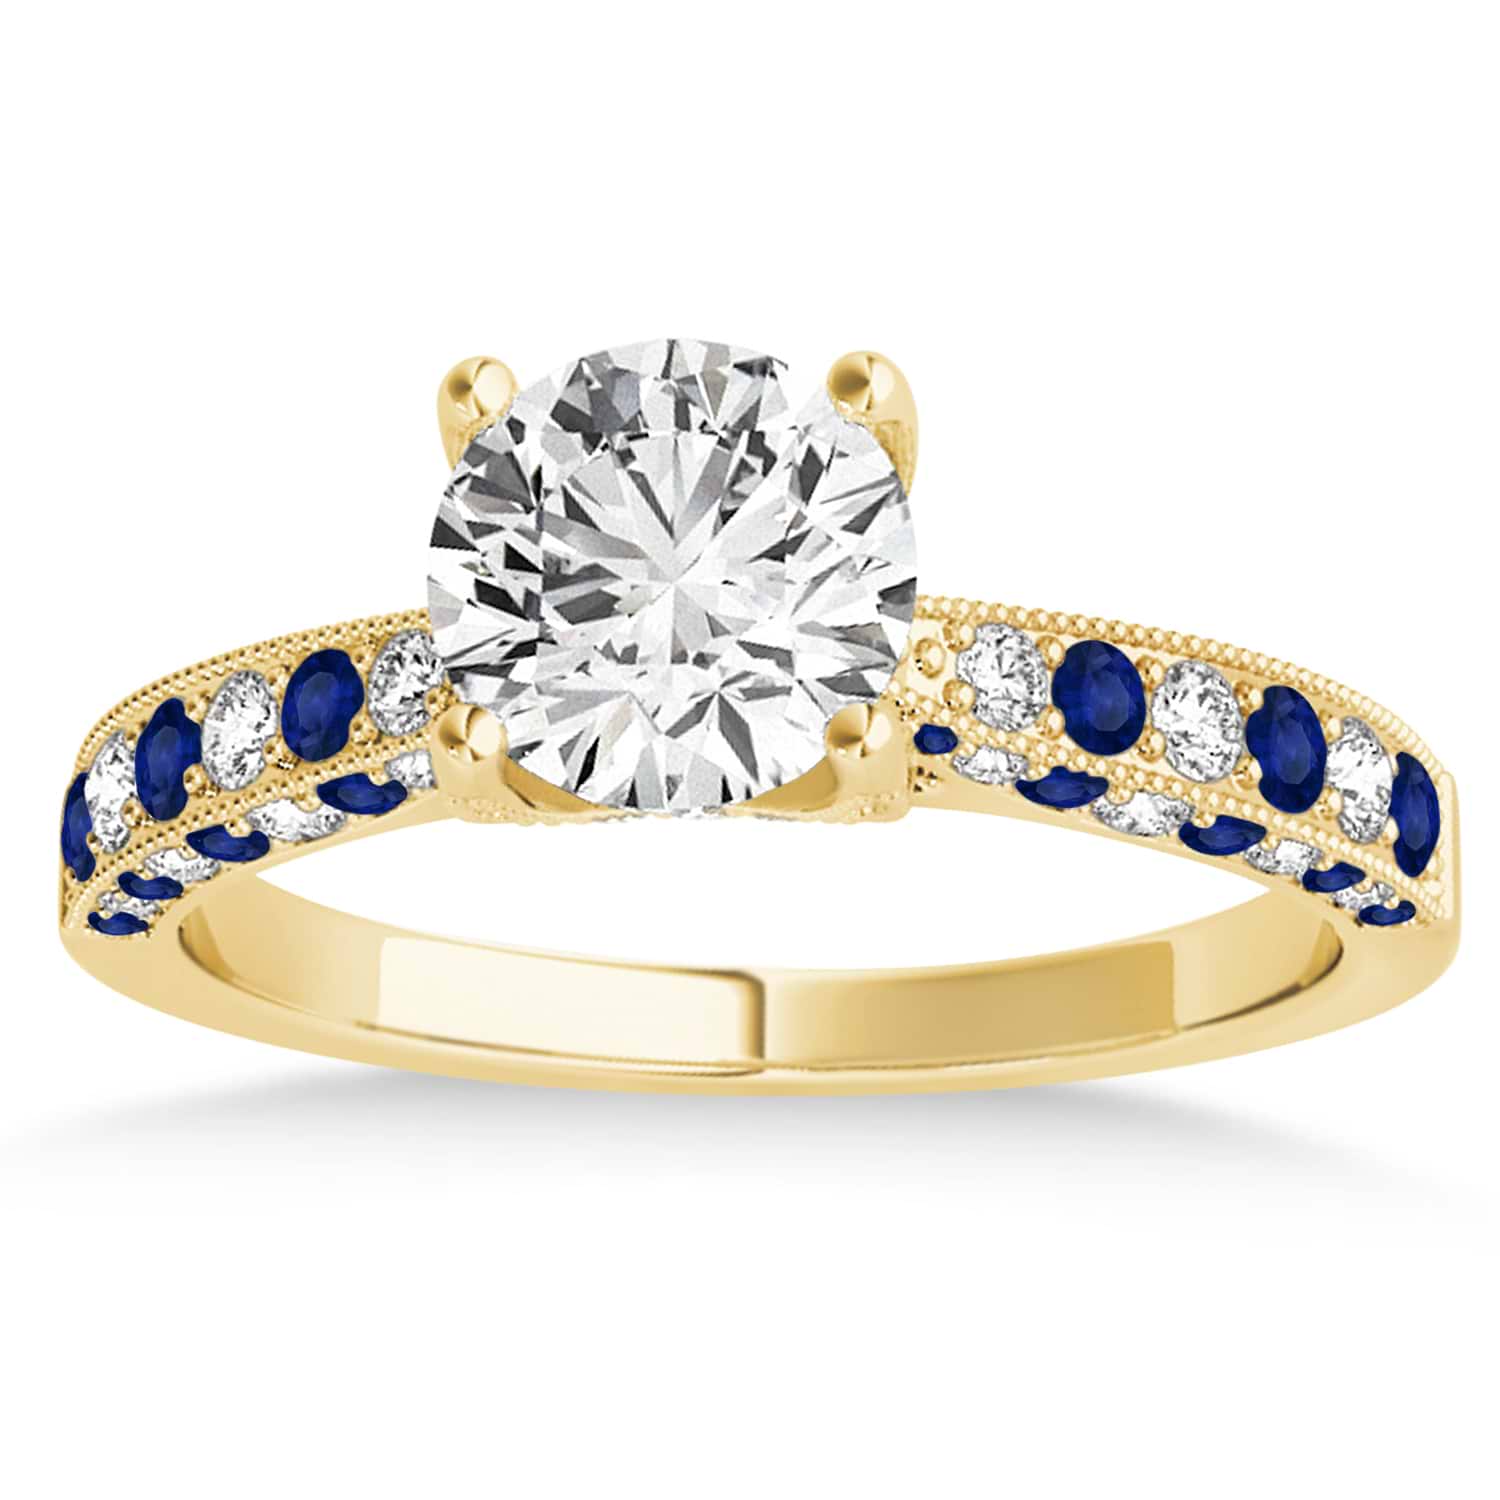 Alternating Diamond & Blue Sapphire Engravable Engagement Ring in 14k Yellow Gold (0.45ct)